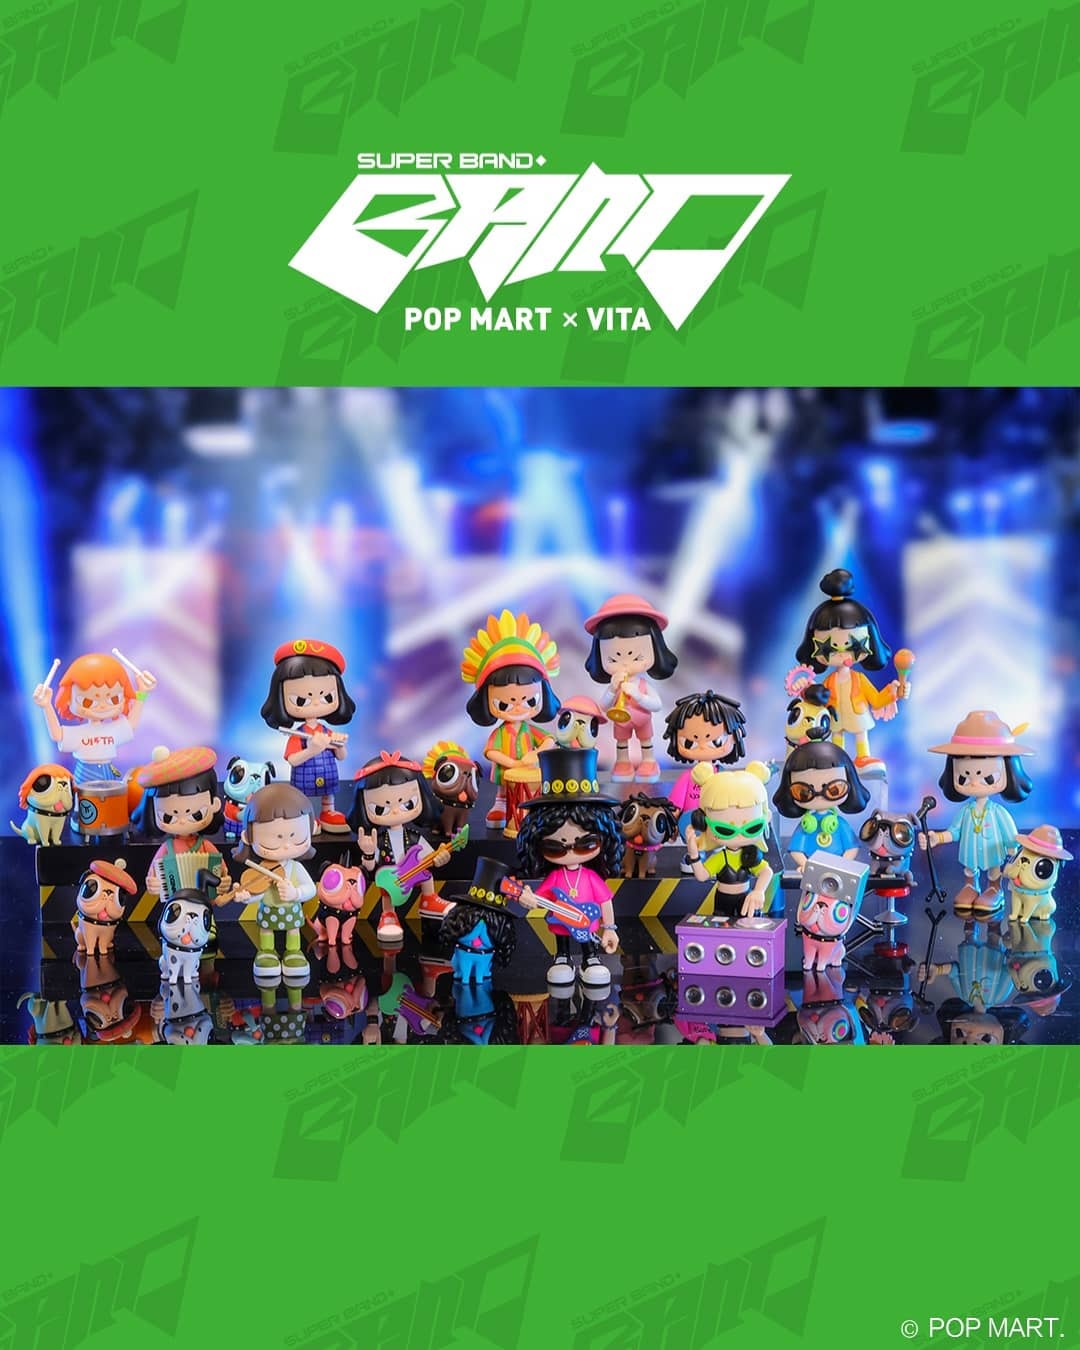 A group of cartoon characters and toy figurines from VITA: Super Band Blind Box Series by Vita.